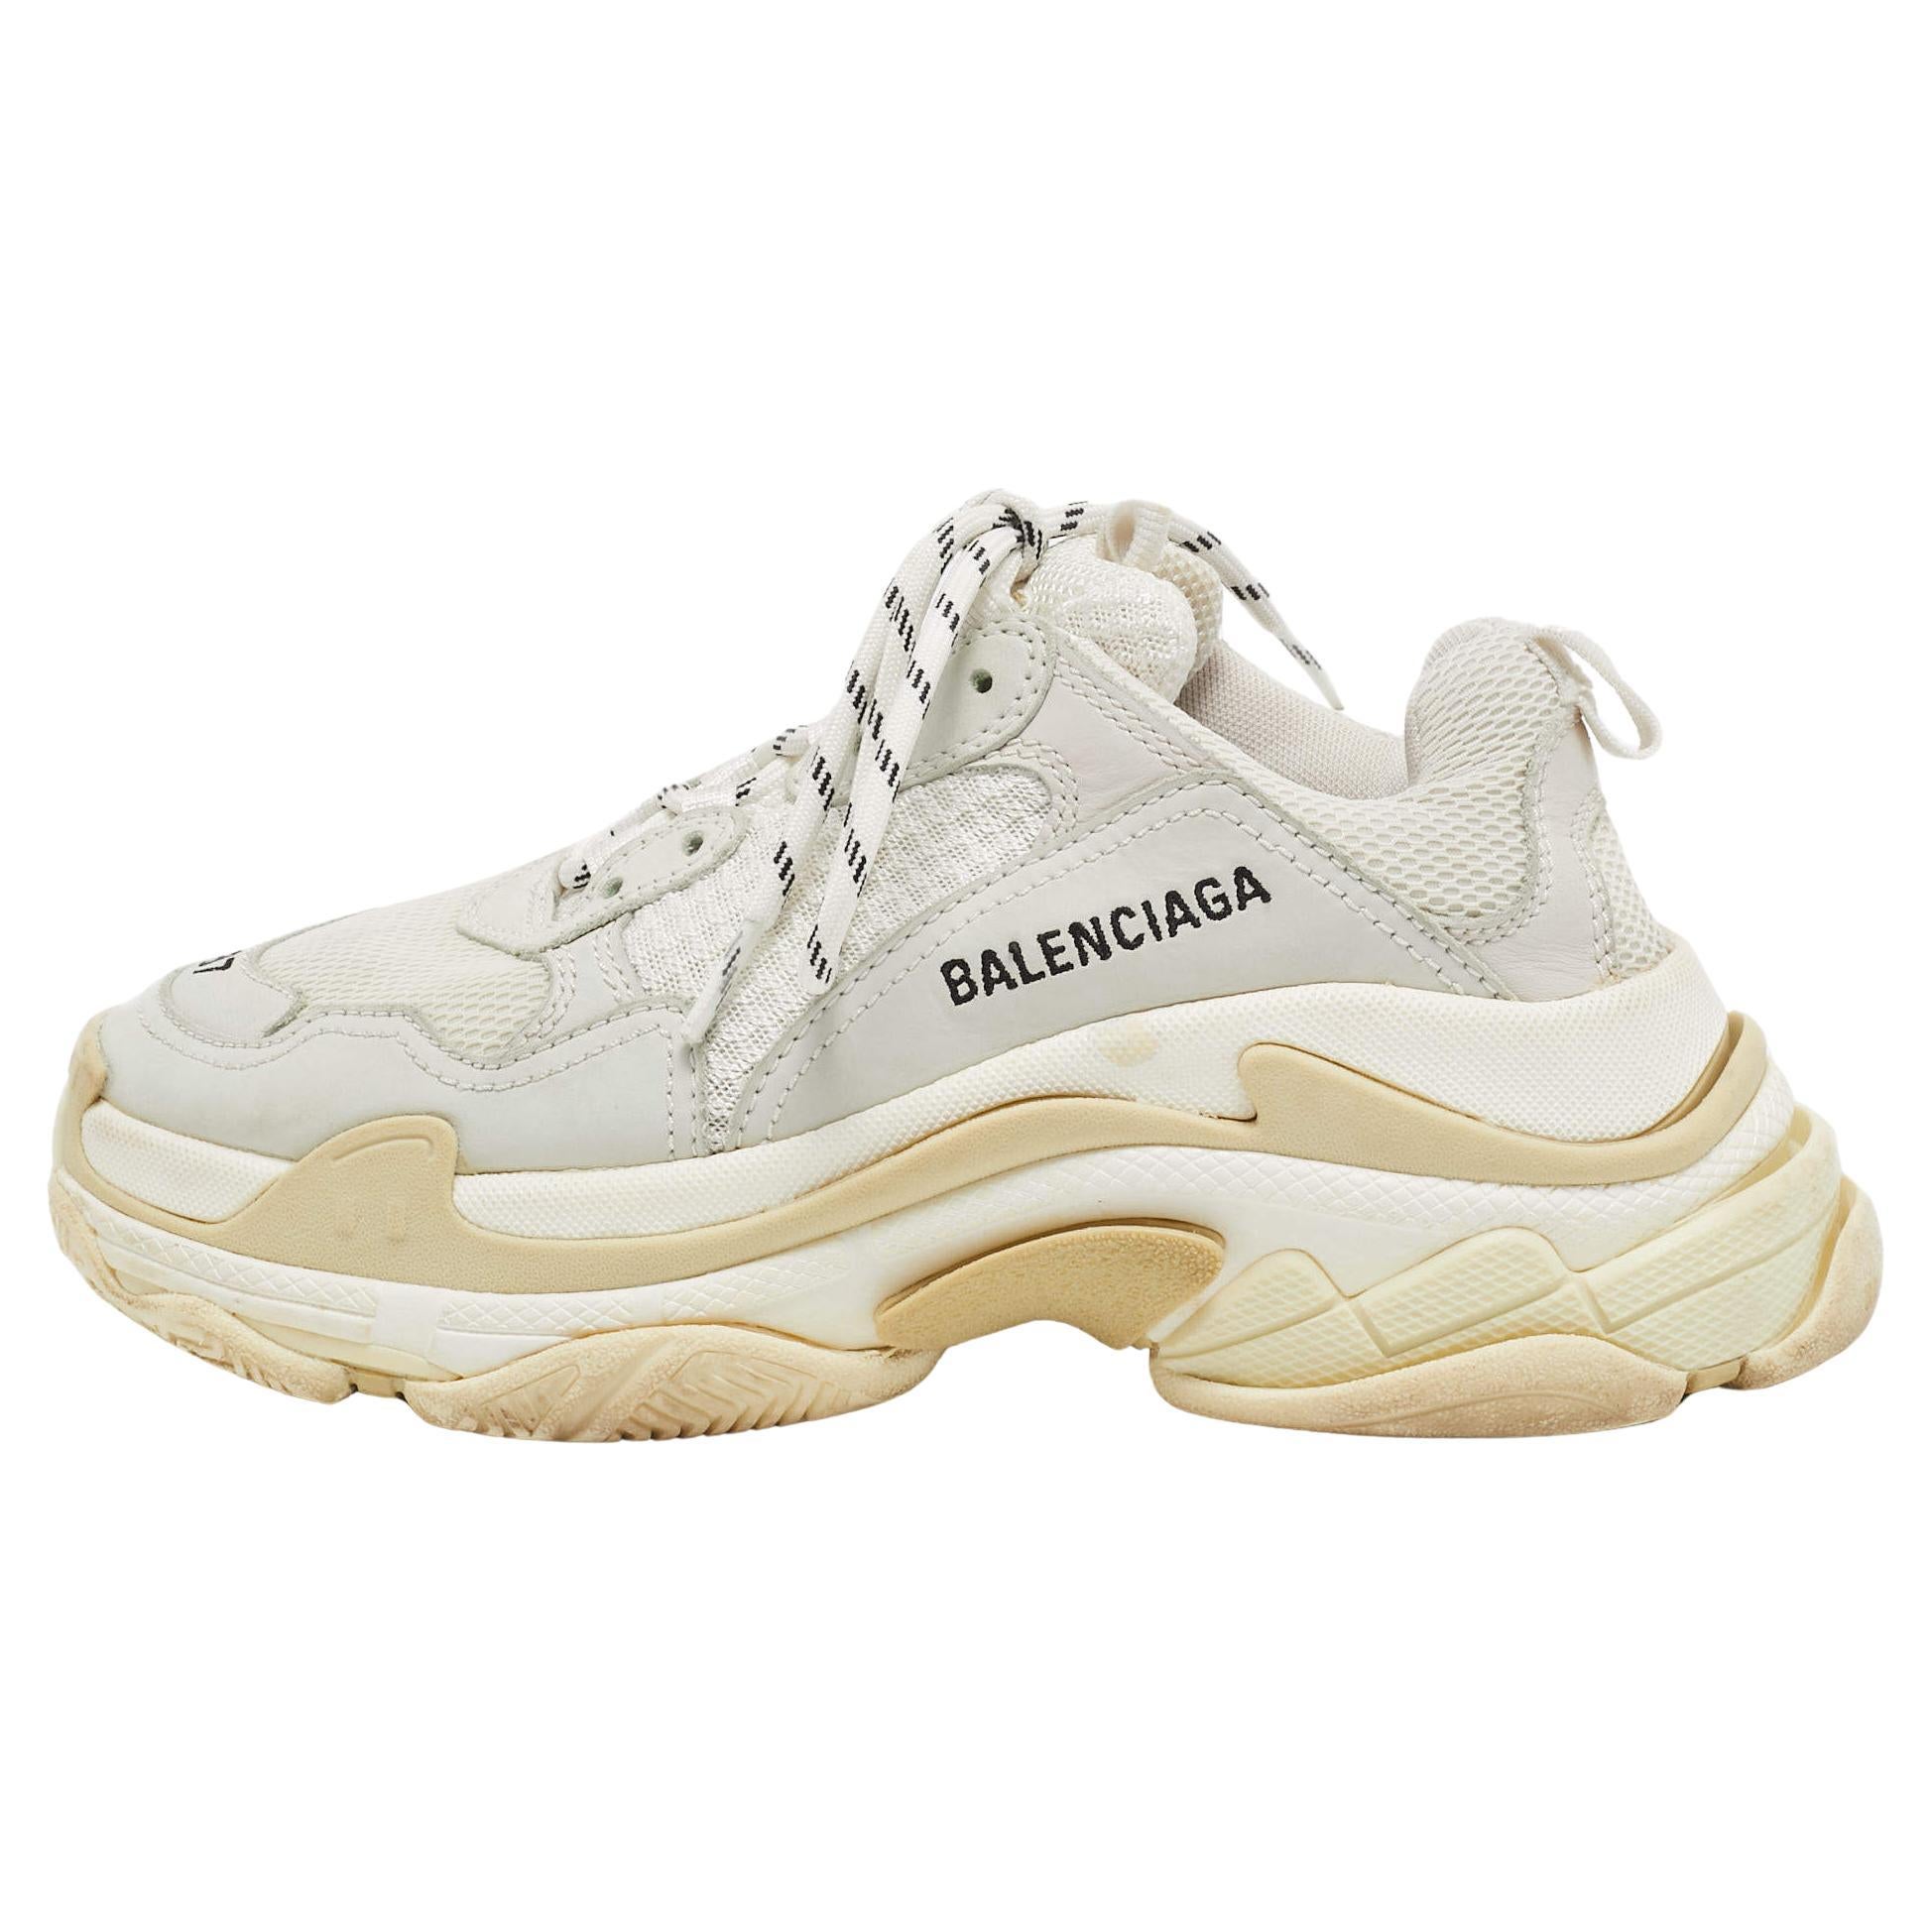 Balenciaga White/Grey Mesh and Leather Triple S Sneakers Size 37 For Sale